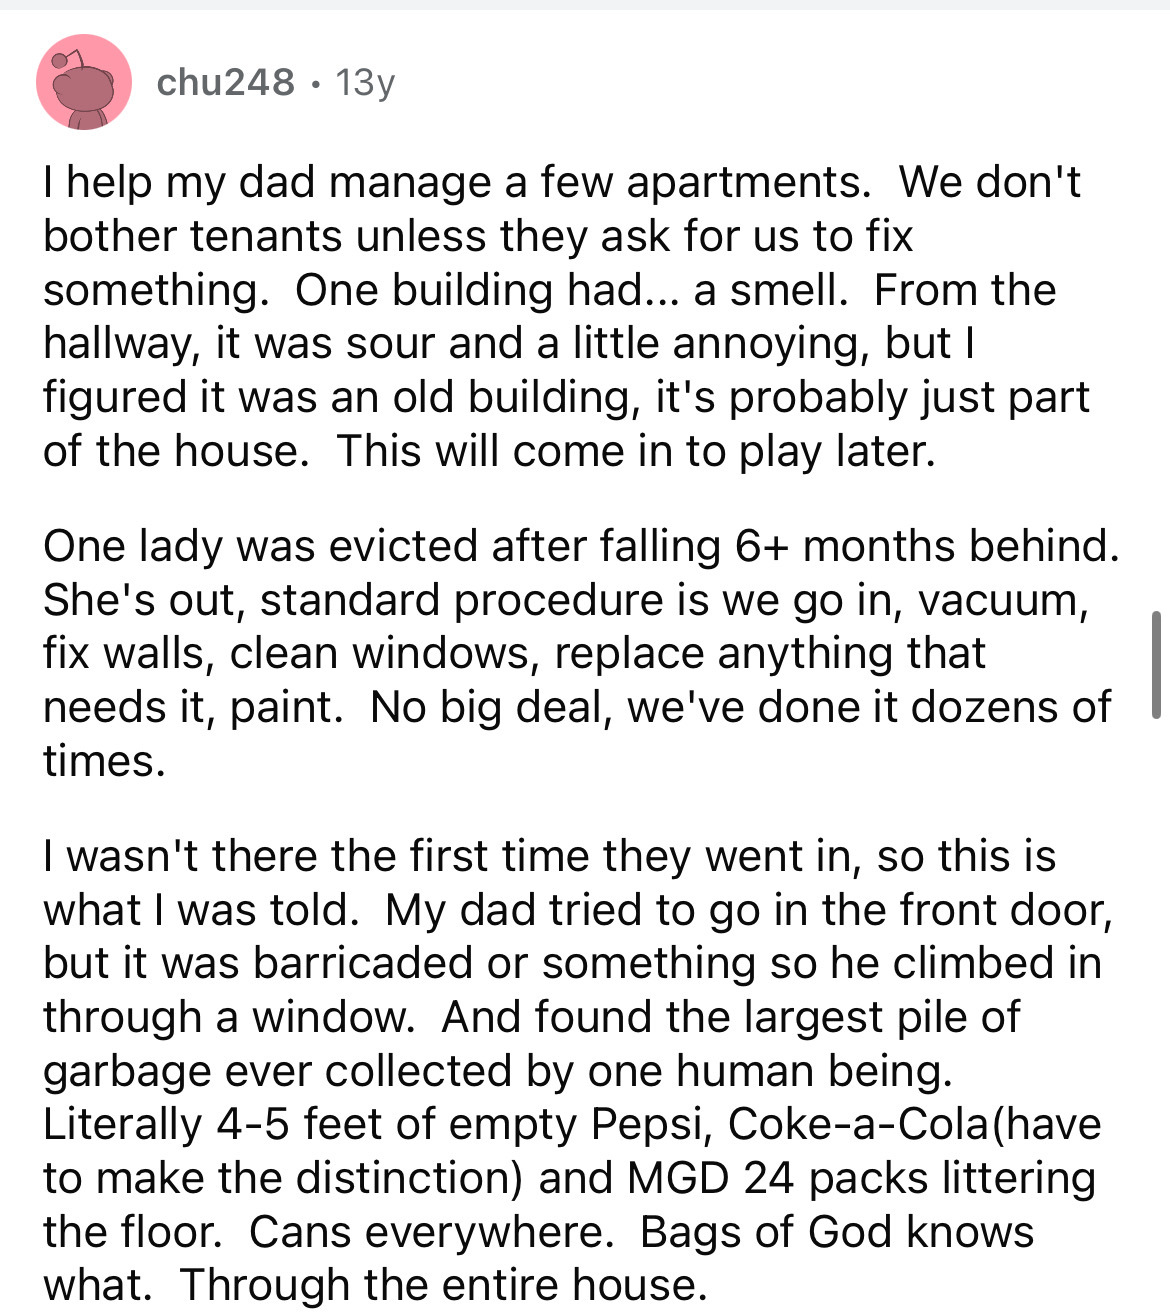 most interesting book i have ever read paragraph - chu248 13y I help my dad manage a few apartments. We don't bother tenants unless they ask for us to fix something. One building had... a smell. From the hallway, it was sour and a little annoying, but I f